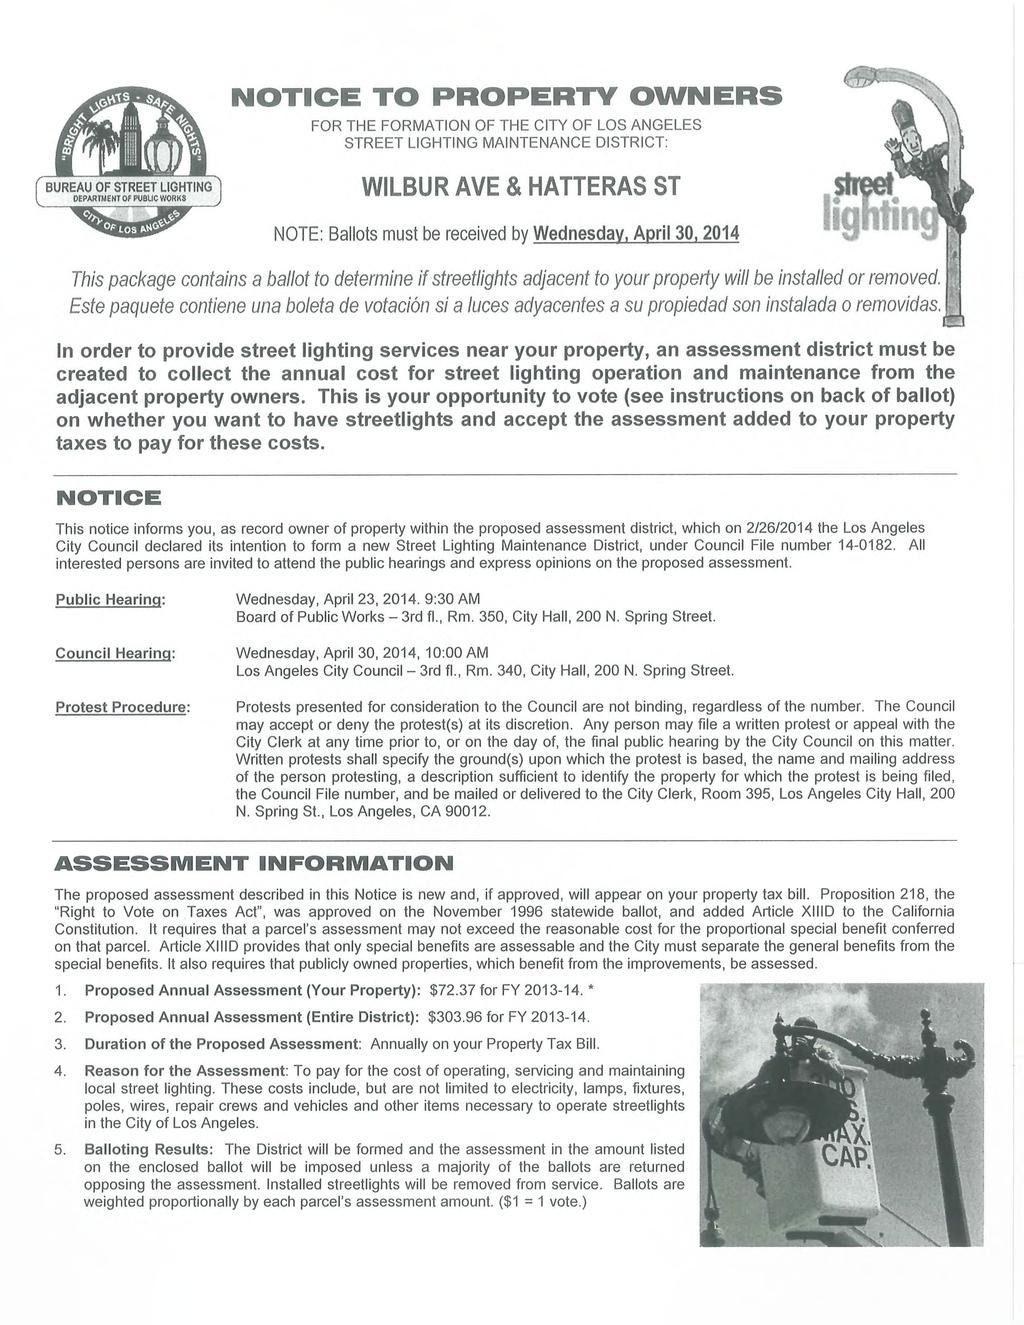 NOTICE TO PROPERTY OWNERS FOR THE FORMATION OF THE CITY OF LOS ANGELES STREET LIGHTING MAINTENANCE DISTRICT: WILBUR AVE & HATTERAS ST NOTE: Ballots must be received by Wednesday, April 30, 2014 This